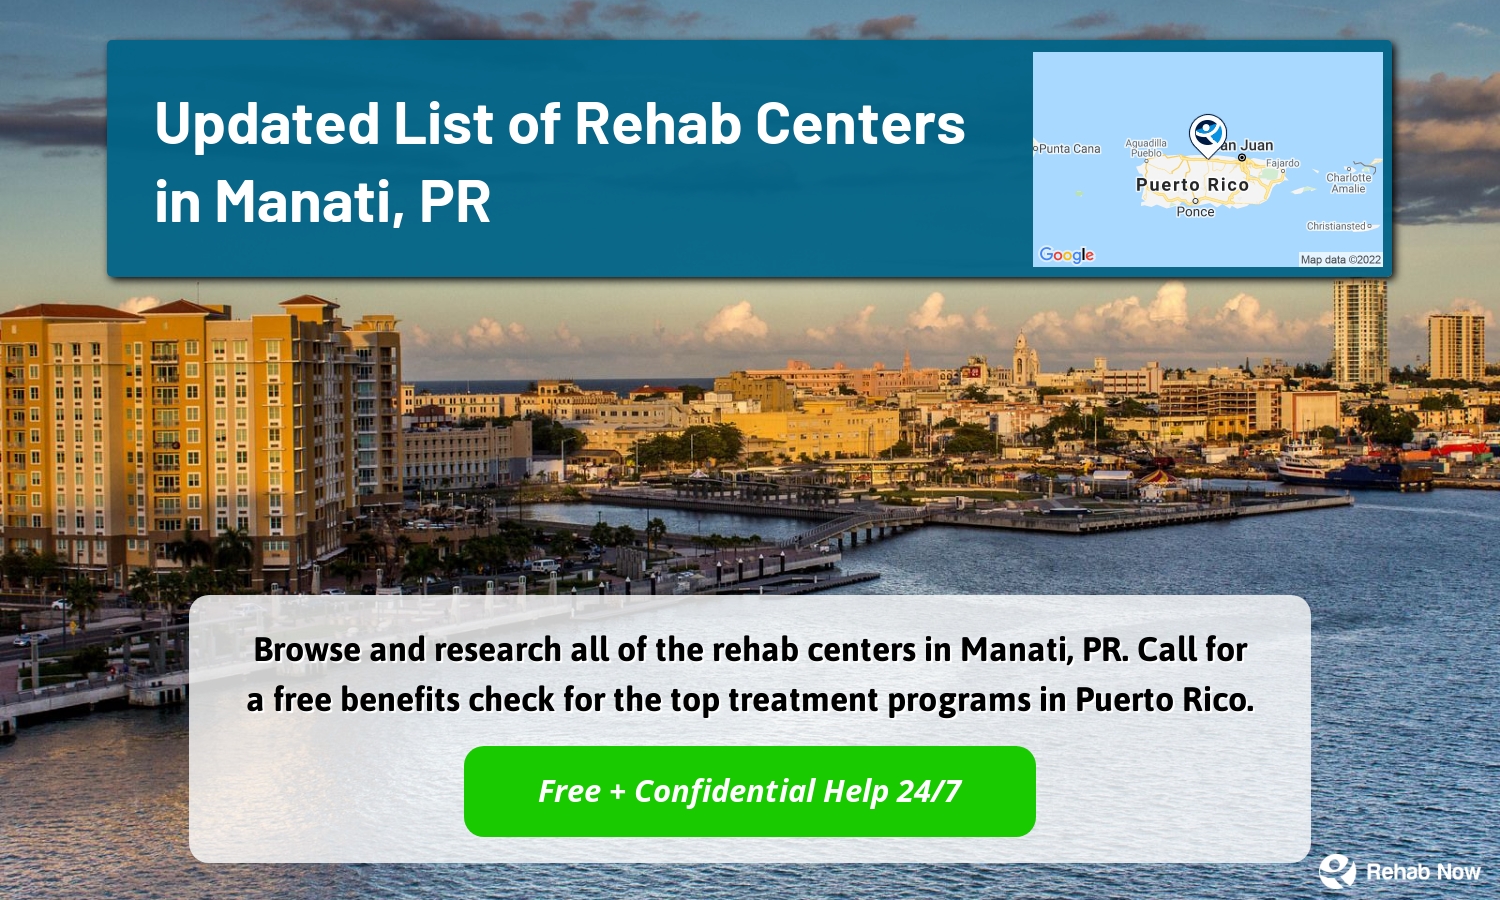 Browse and research all of the rehab centers in Manati, PR. Call for a free benefits check for the top treatment programs in Puerto Rico.